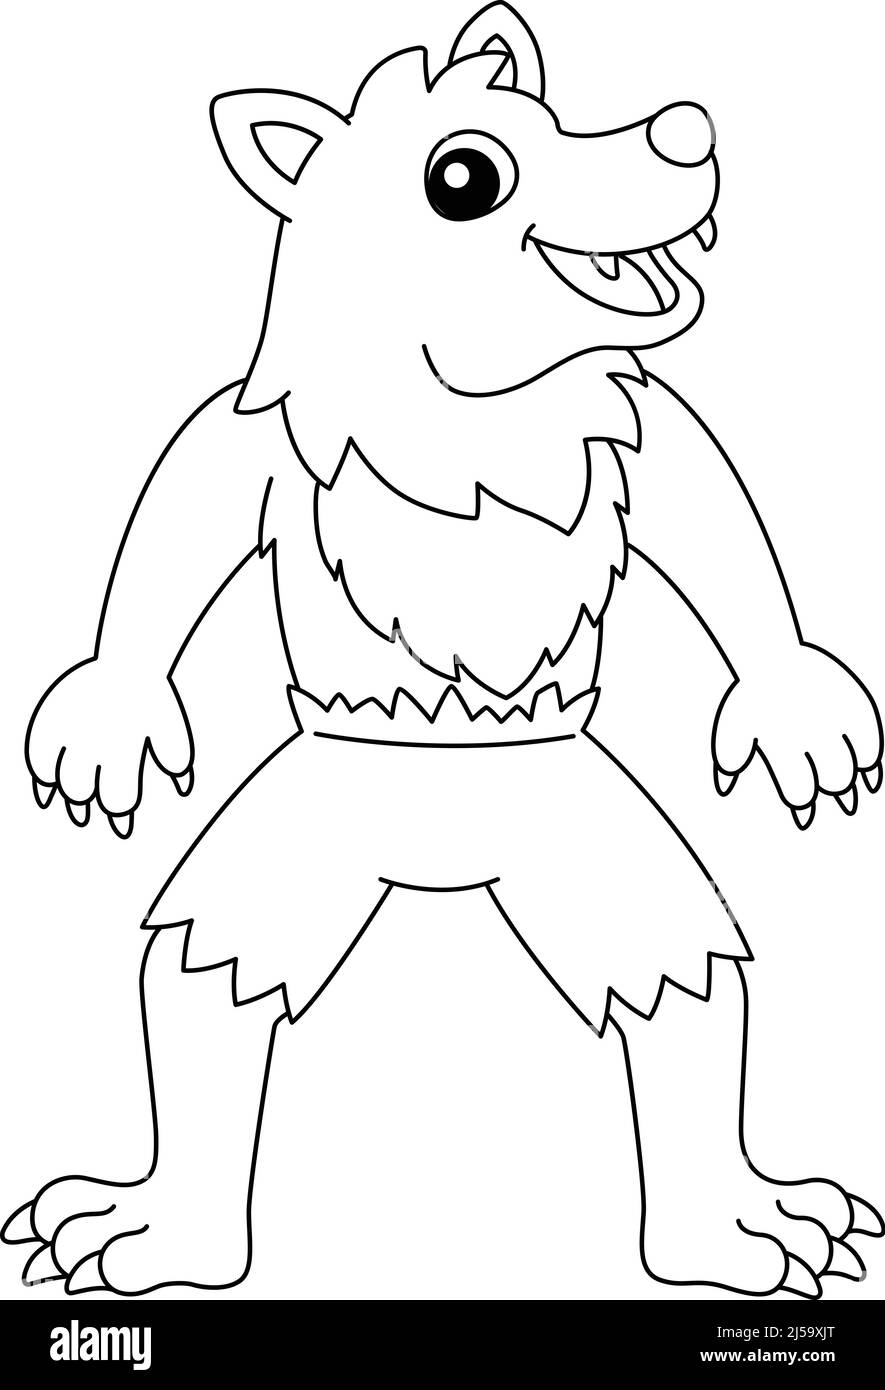 Werewolf halloween coloring page isolated for kids stock vector image art